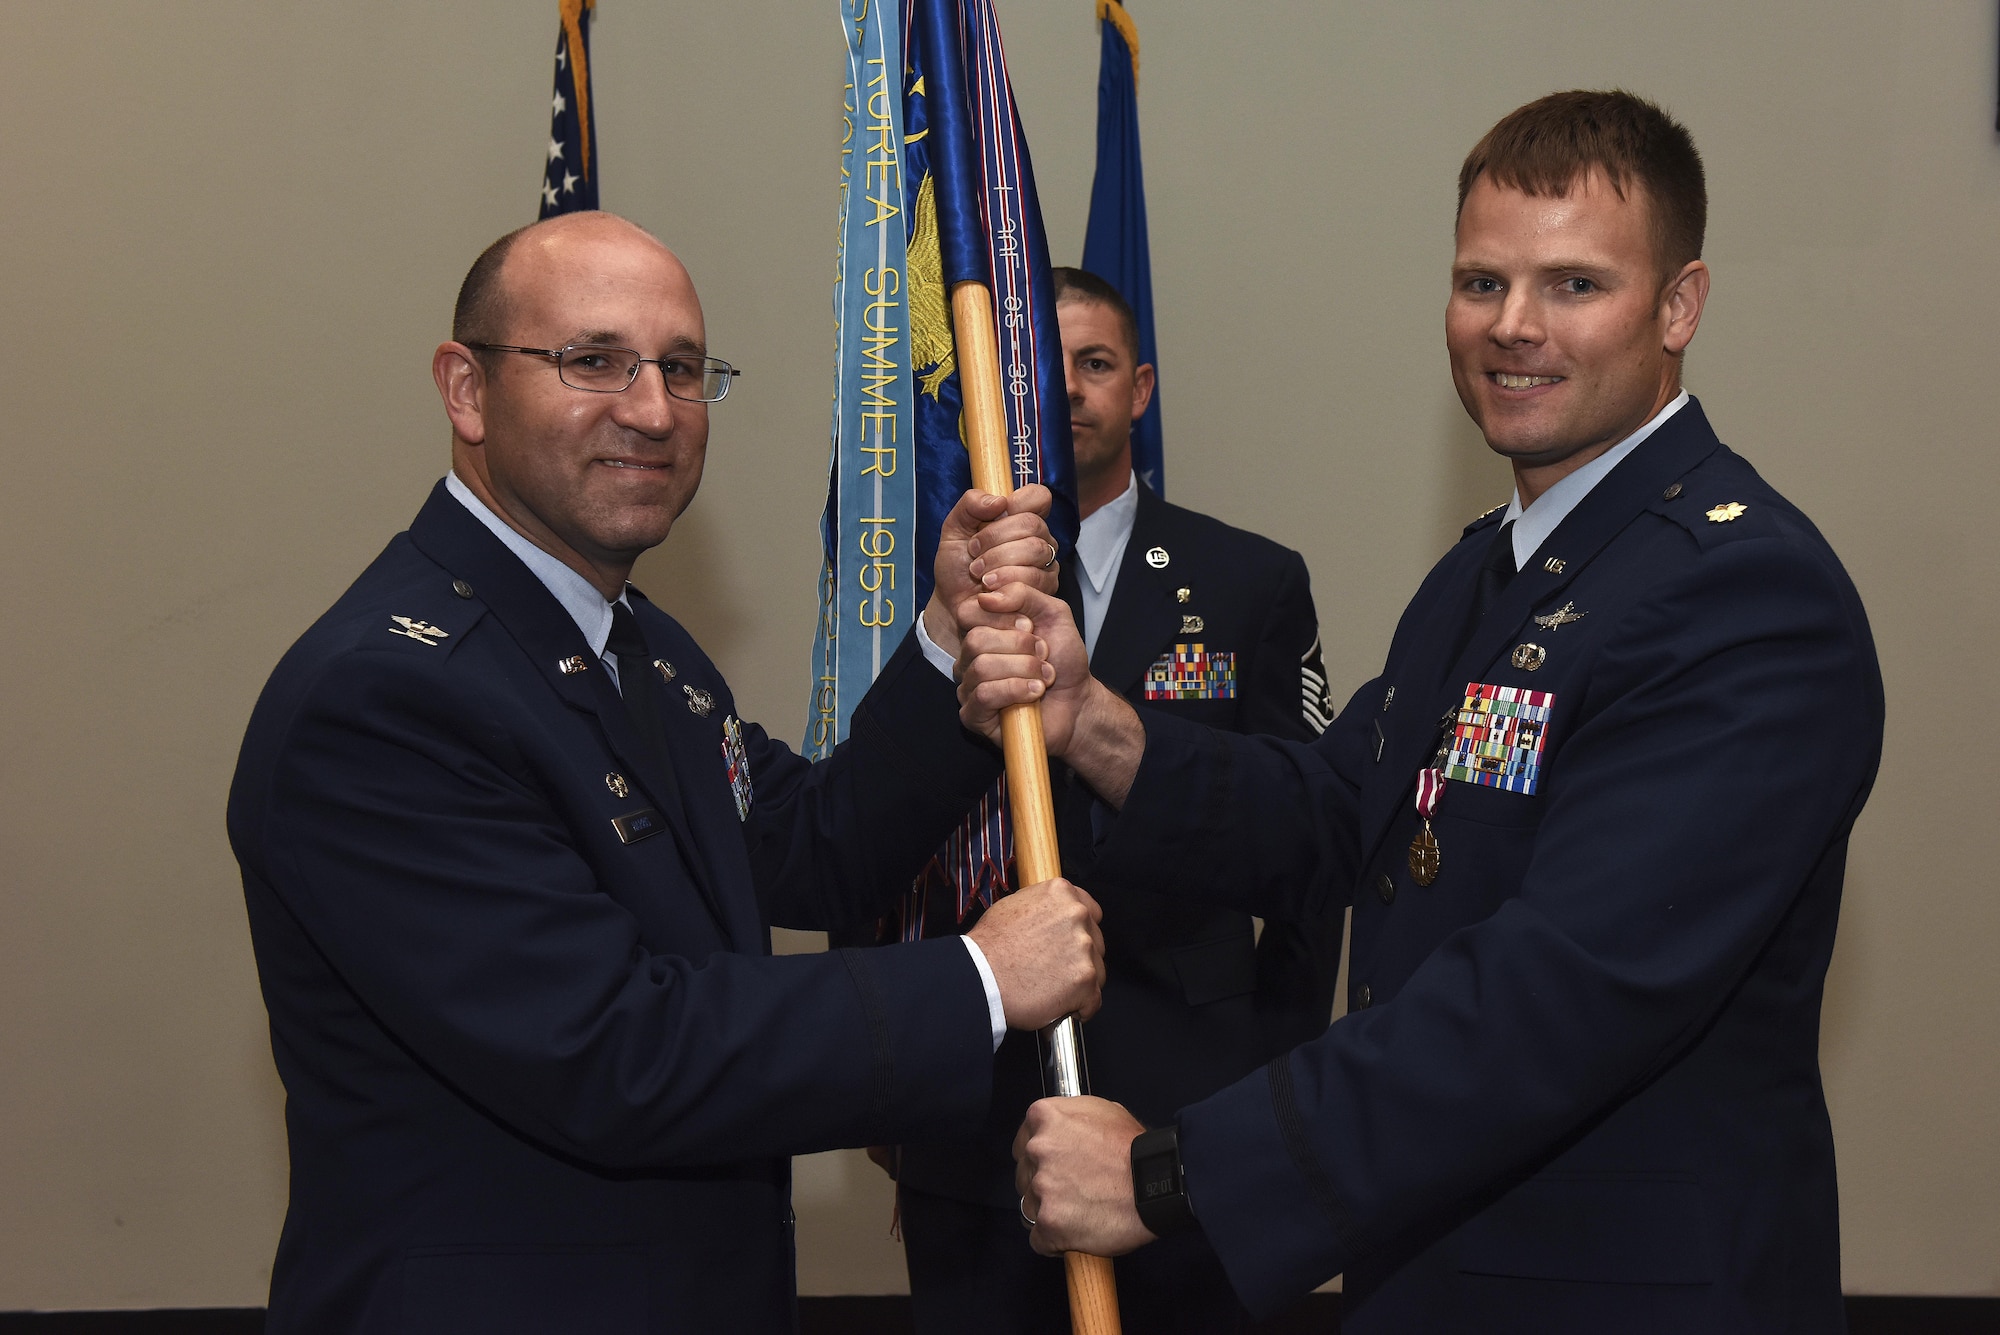 U.S. Air Force Col. Christopher Harris, 17th Mission Support Group commander, receives the unit guideon from Maj. Stephen Maddox, 17th Communications Squadron commander, during the 17th CS change of command ceremony at the Event Center on Goodfellow Air Force Base, Texas.